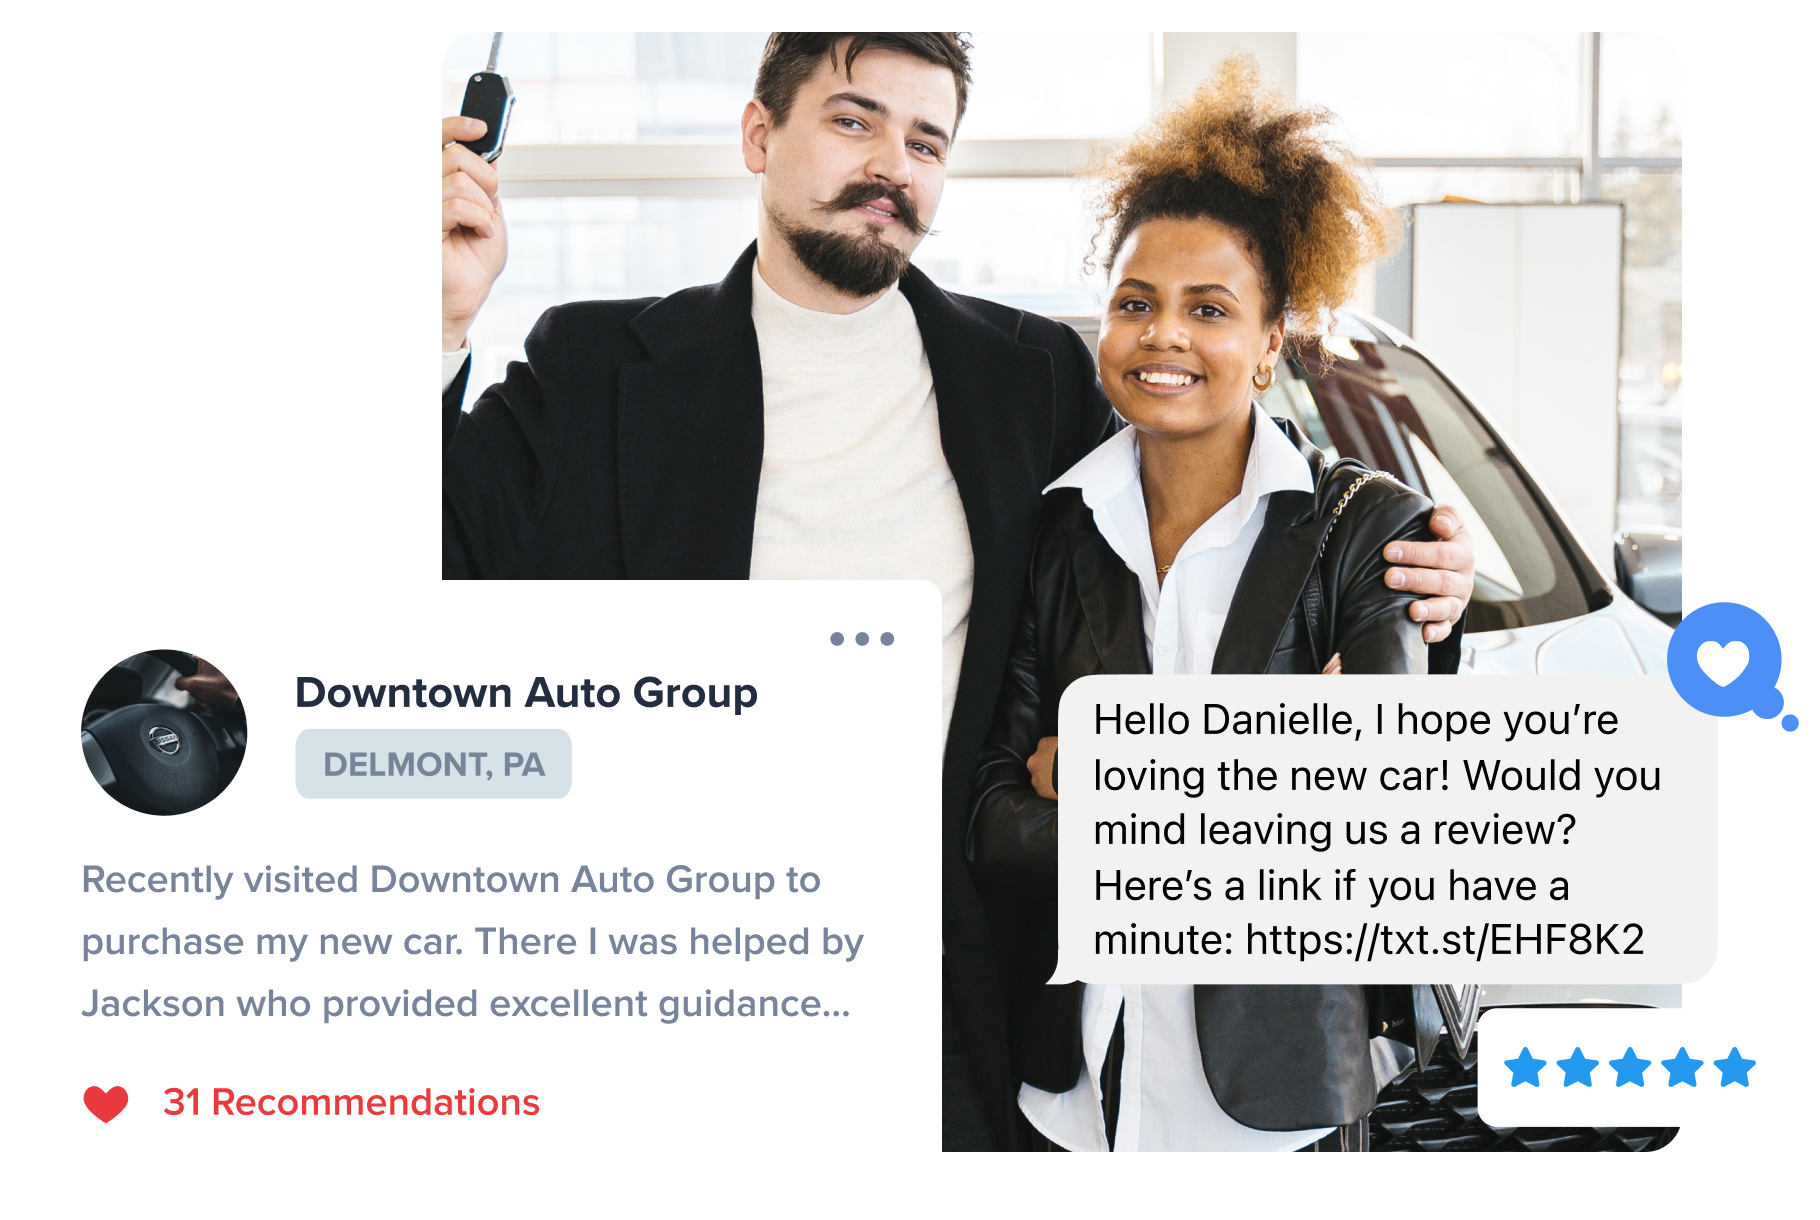 Generate more dealership reviews with text messages example